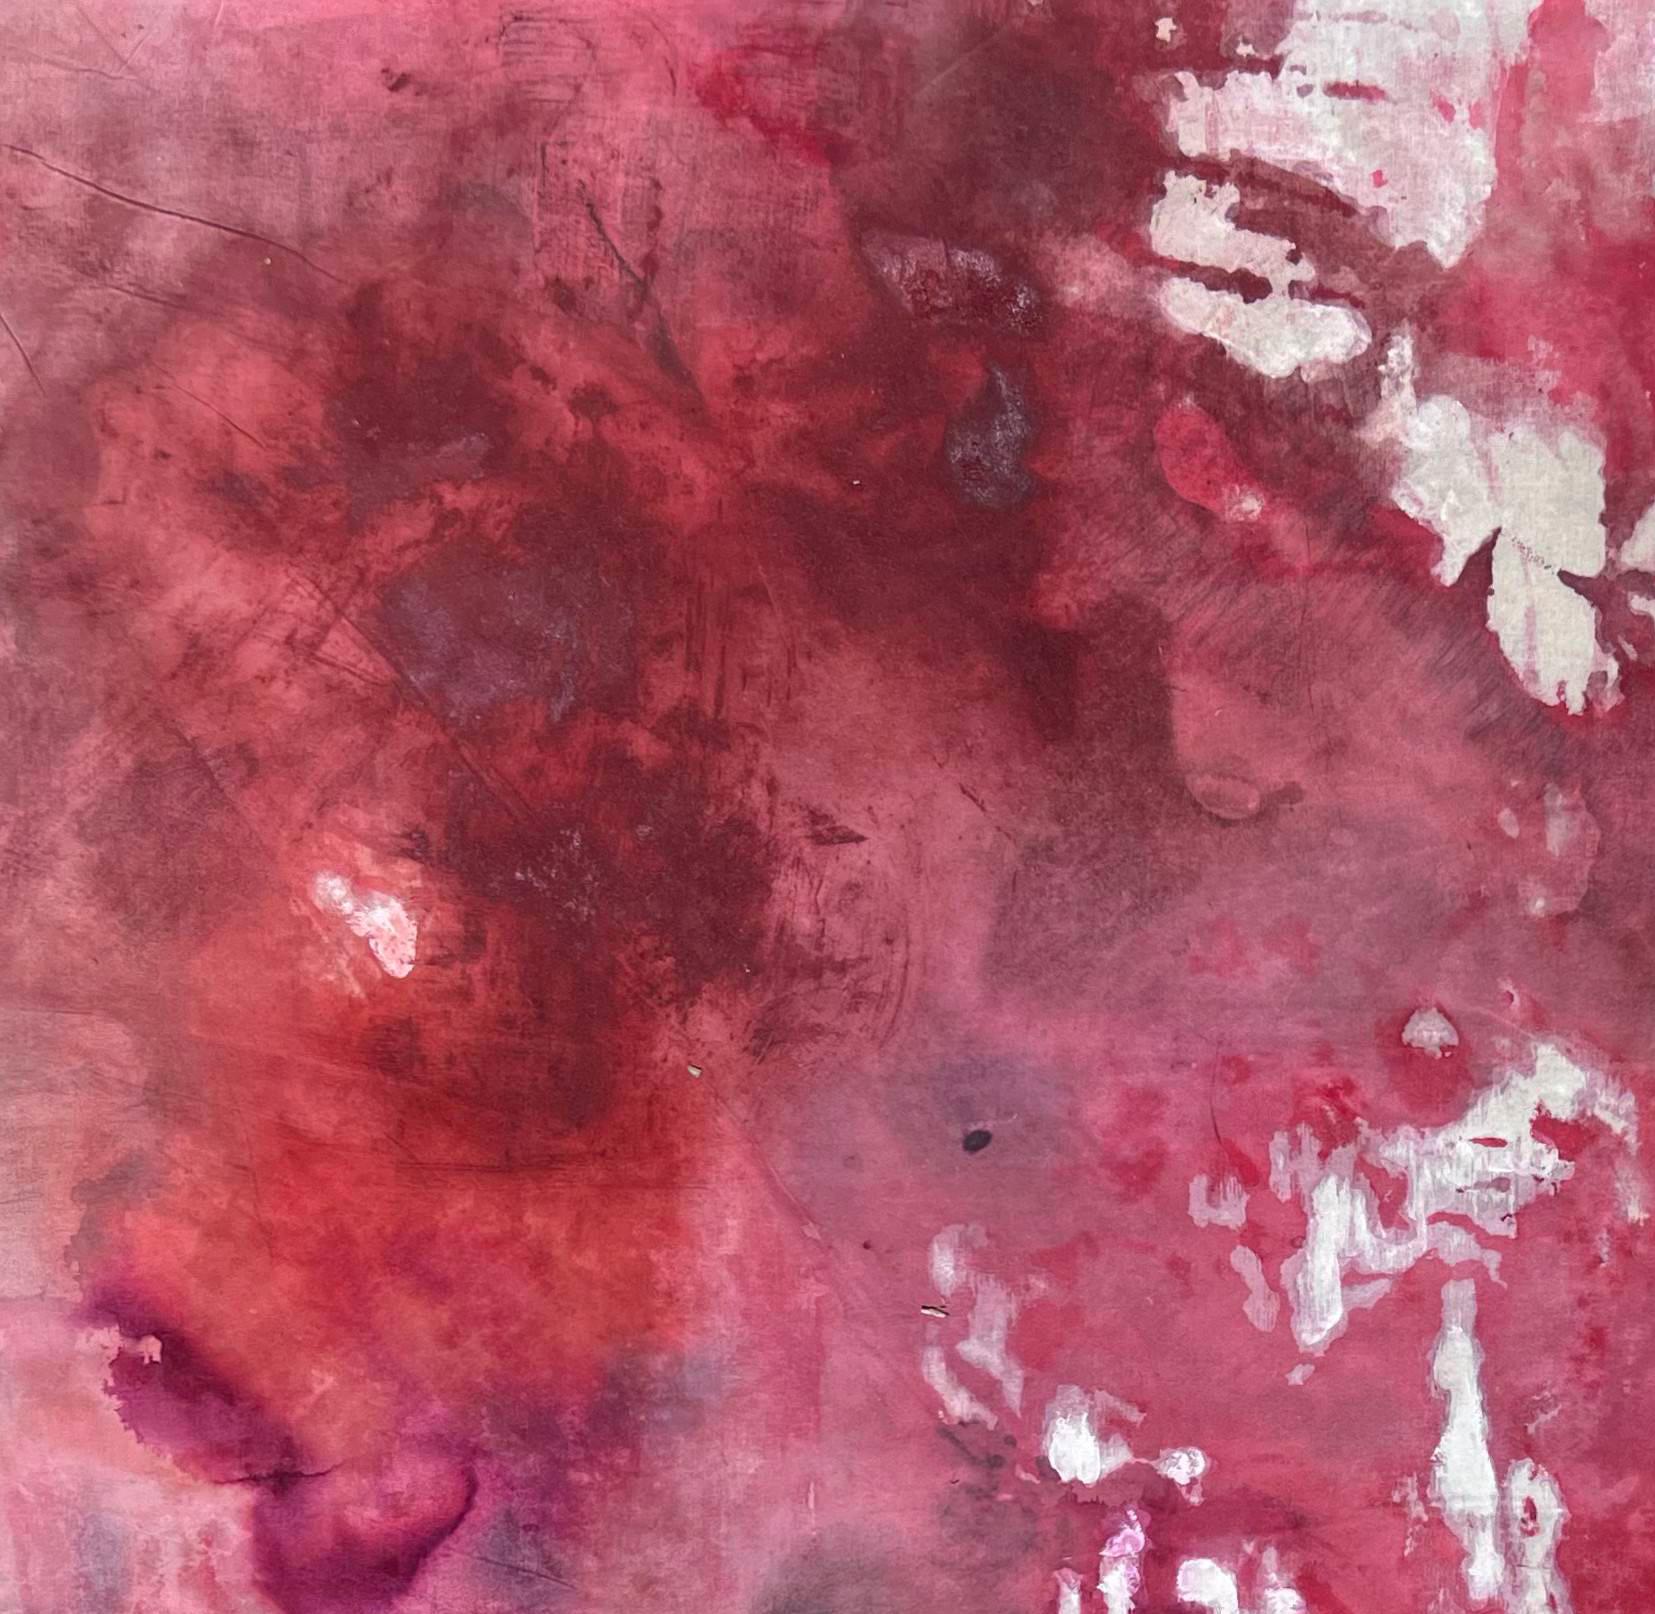 Liquid Life Series n7, 2023 by Rosario Briones
From the series Liquid Life
Mixed media: natural pigments, Indian ink, watercolor, and betum on canvas.
Dimensions: 200 H X 156 W cm.
Unframed
Signed by the artist

The “Liquid Life” series.
About